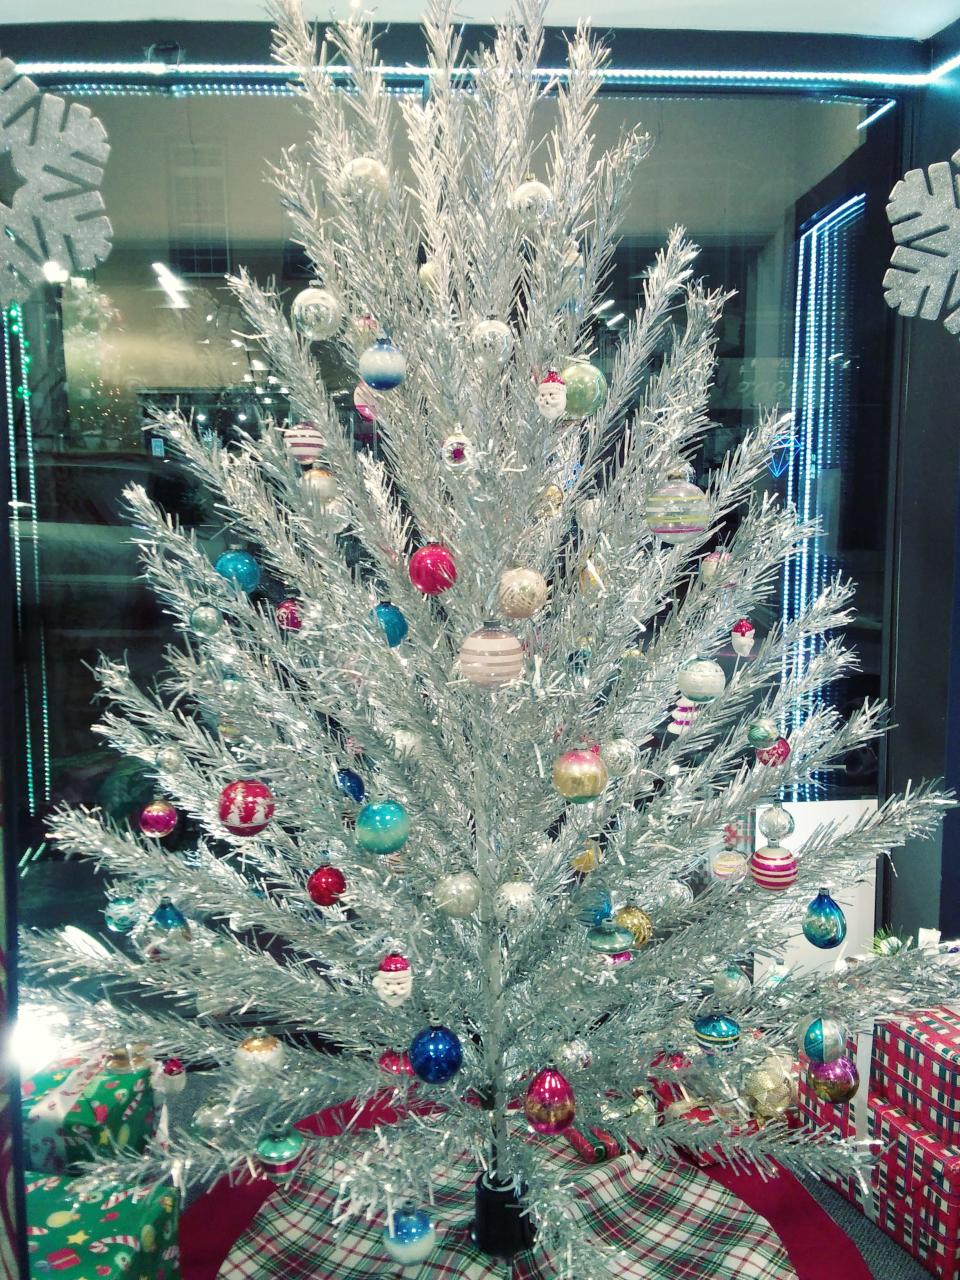 An Evergleam aluminum tree decorated as it would've been in the 1960s.